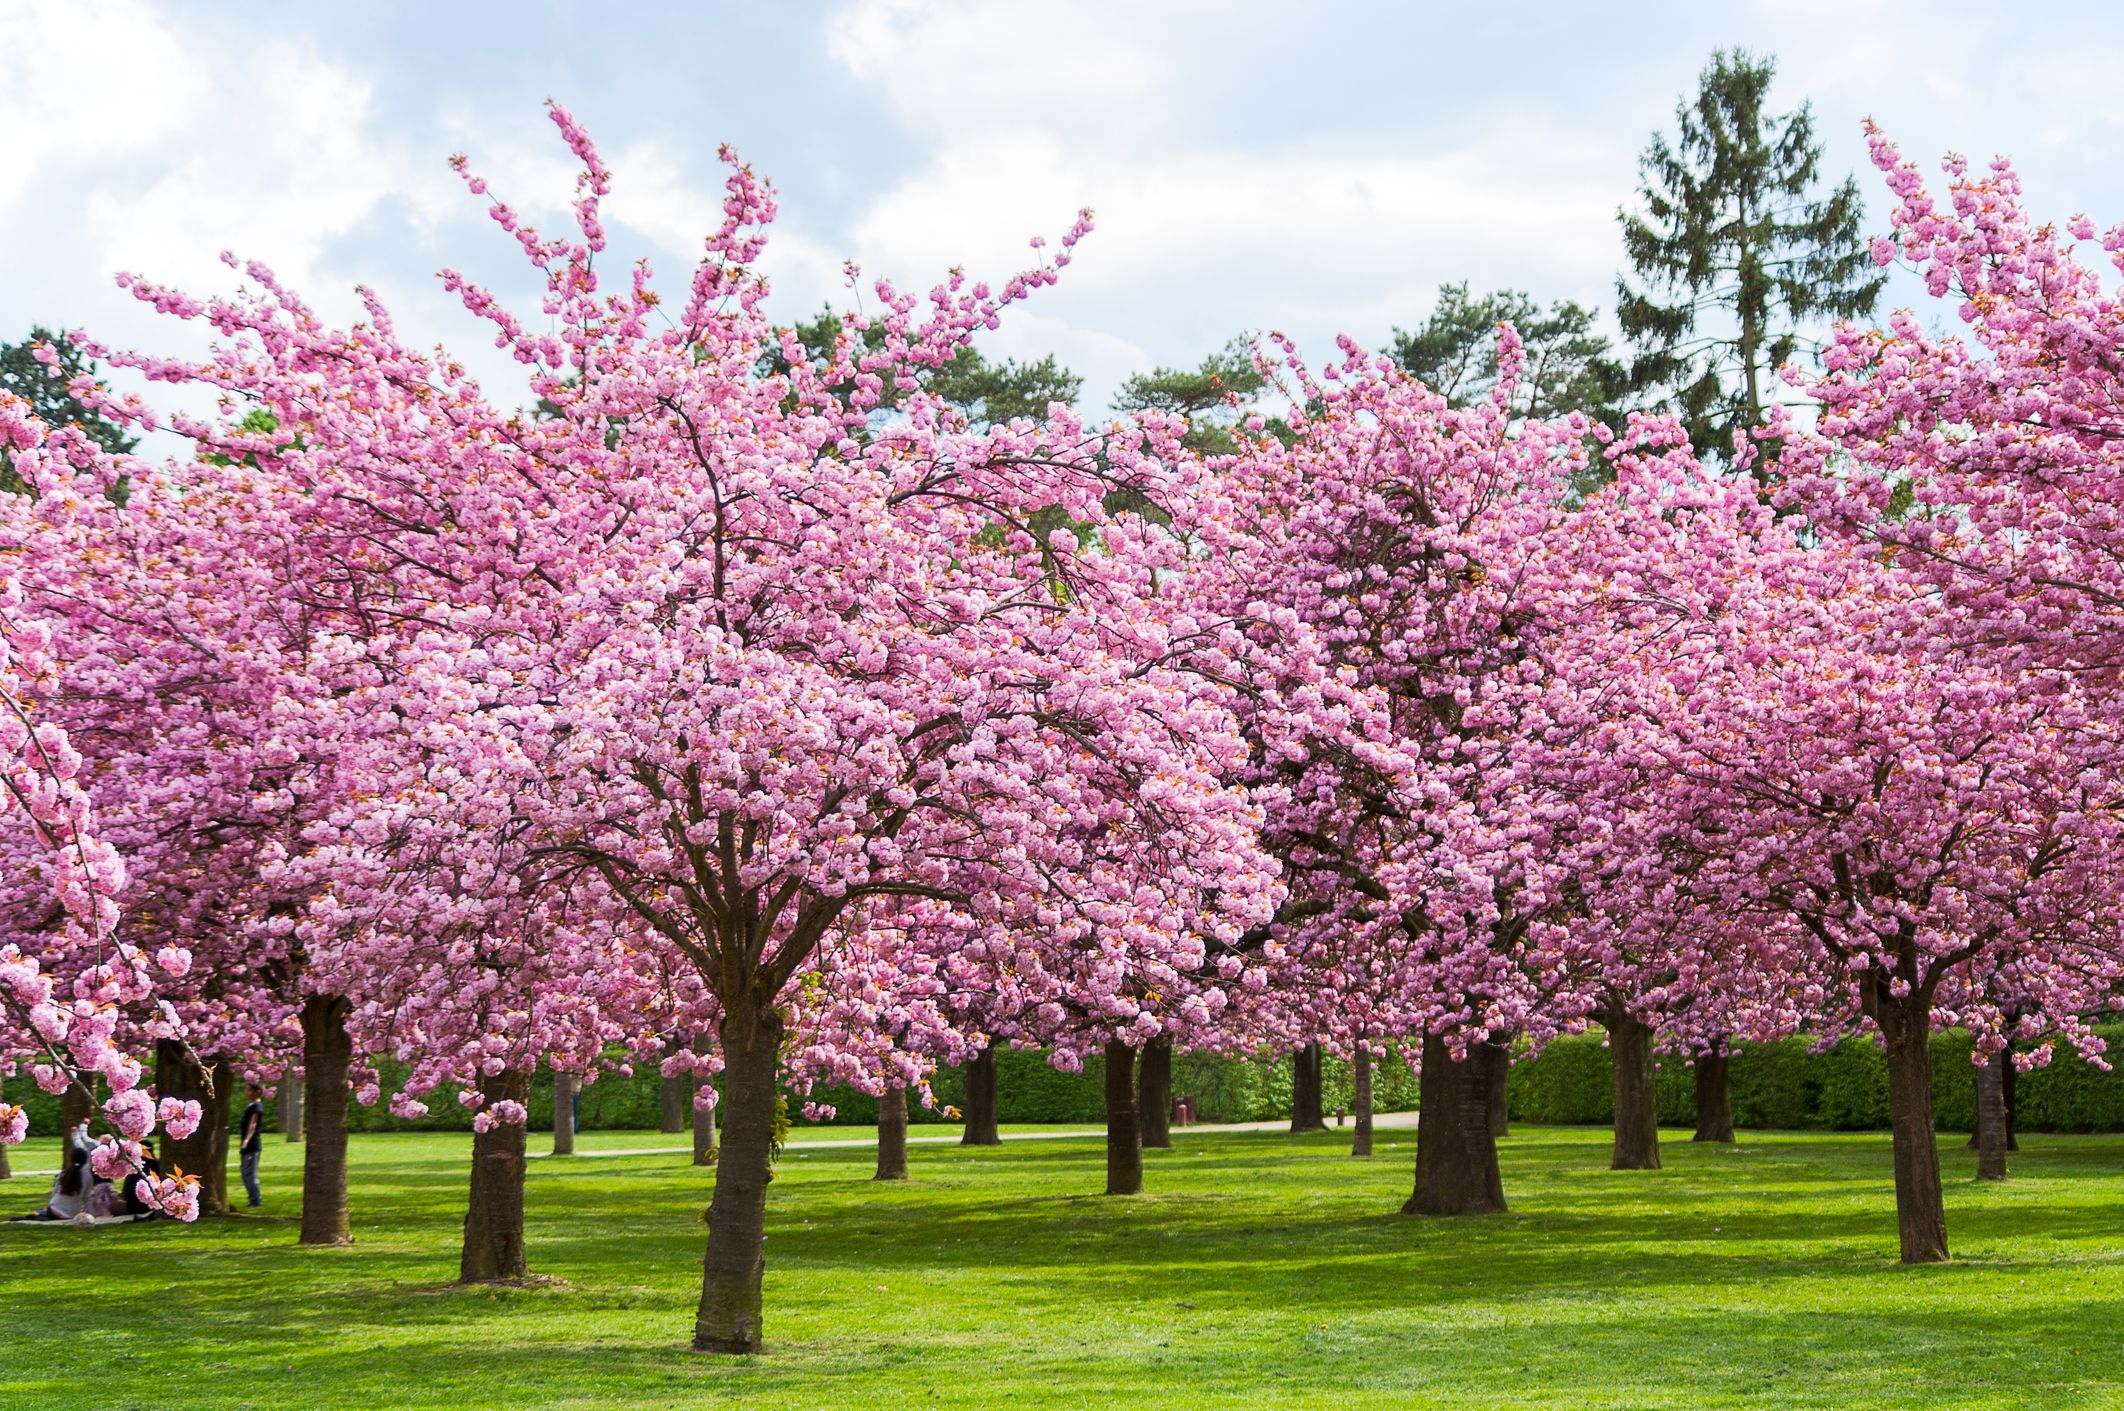 25 Cherry Blossoms Facts - Things You Didn'T Know About Cherry Blossom Trees